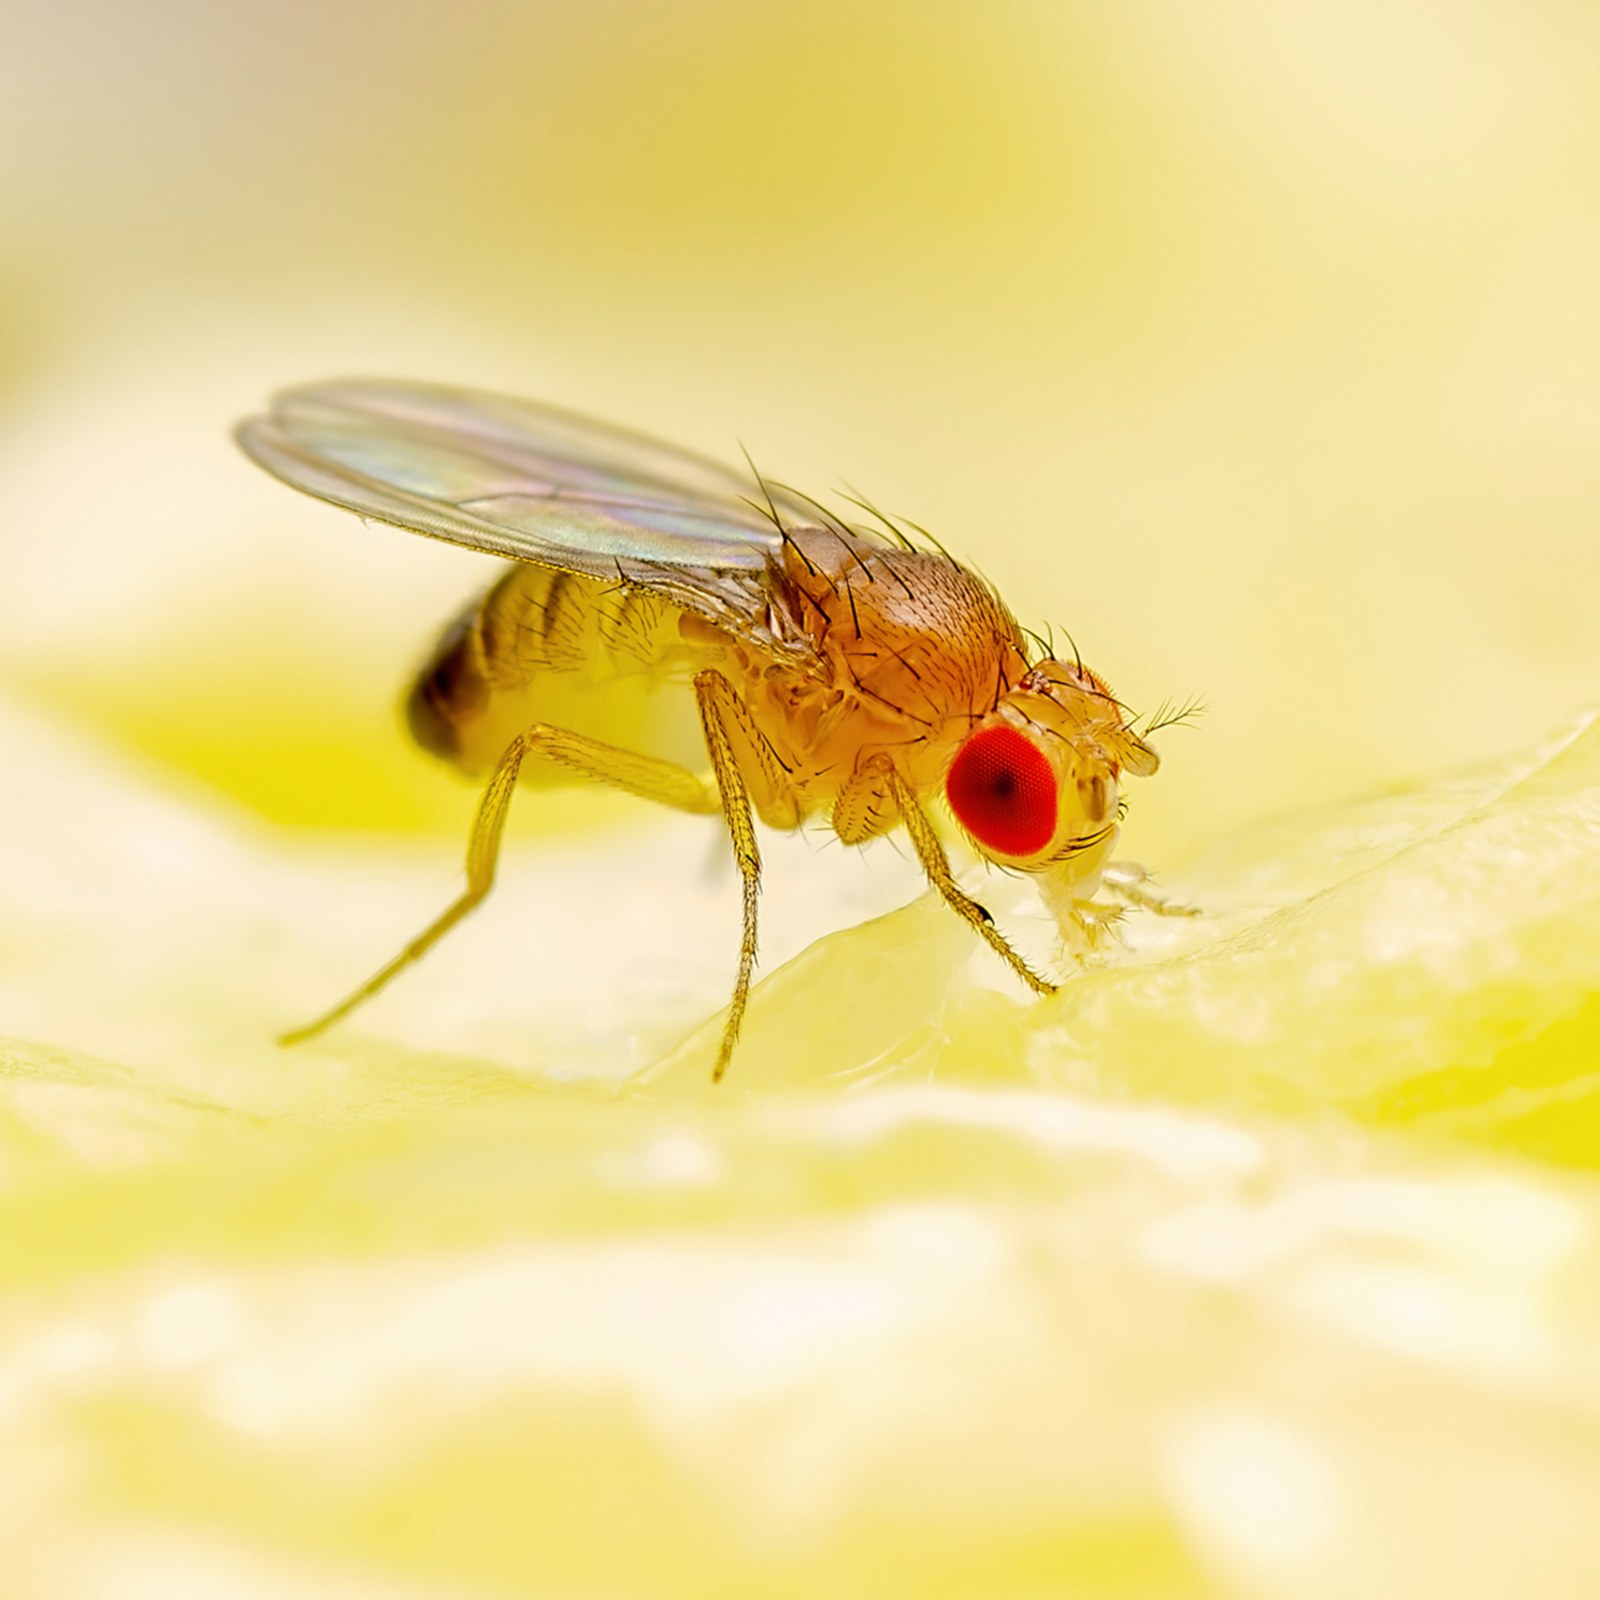 How to Get Rid of Fruit Flies Forever with These Frugal Tactics